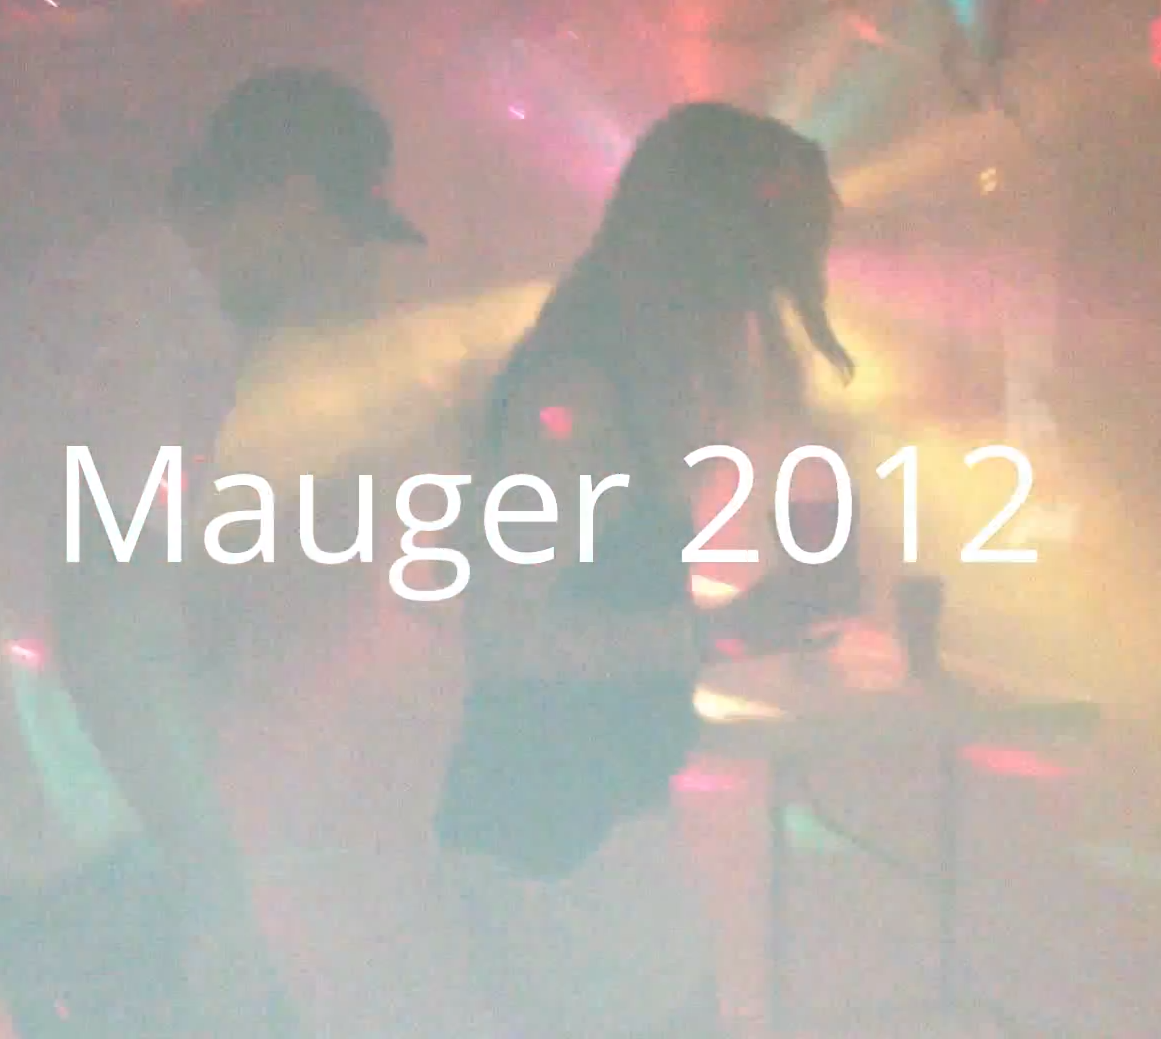 Party Mauger 2012